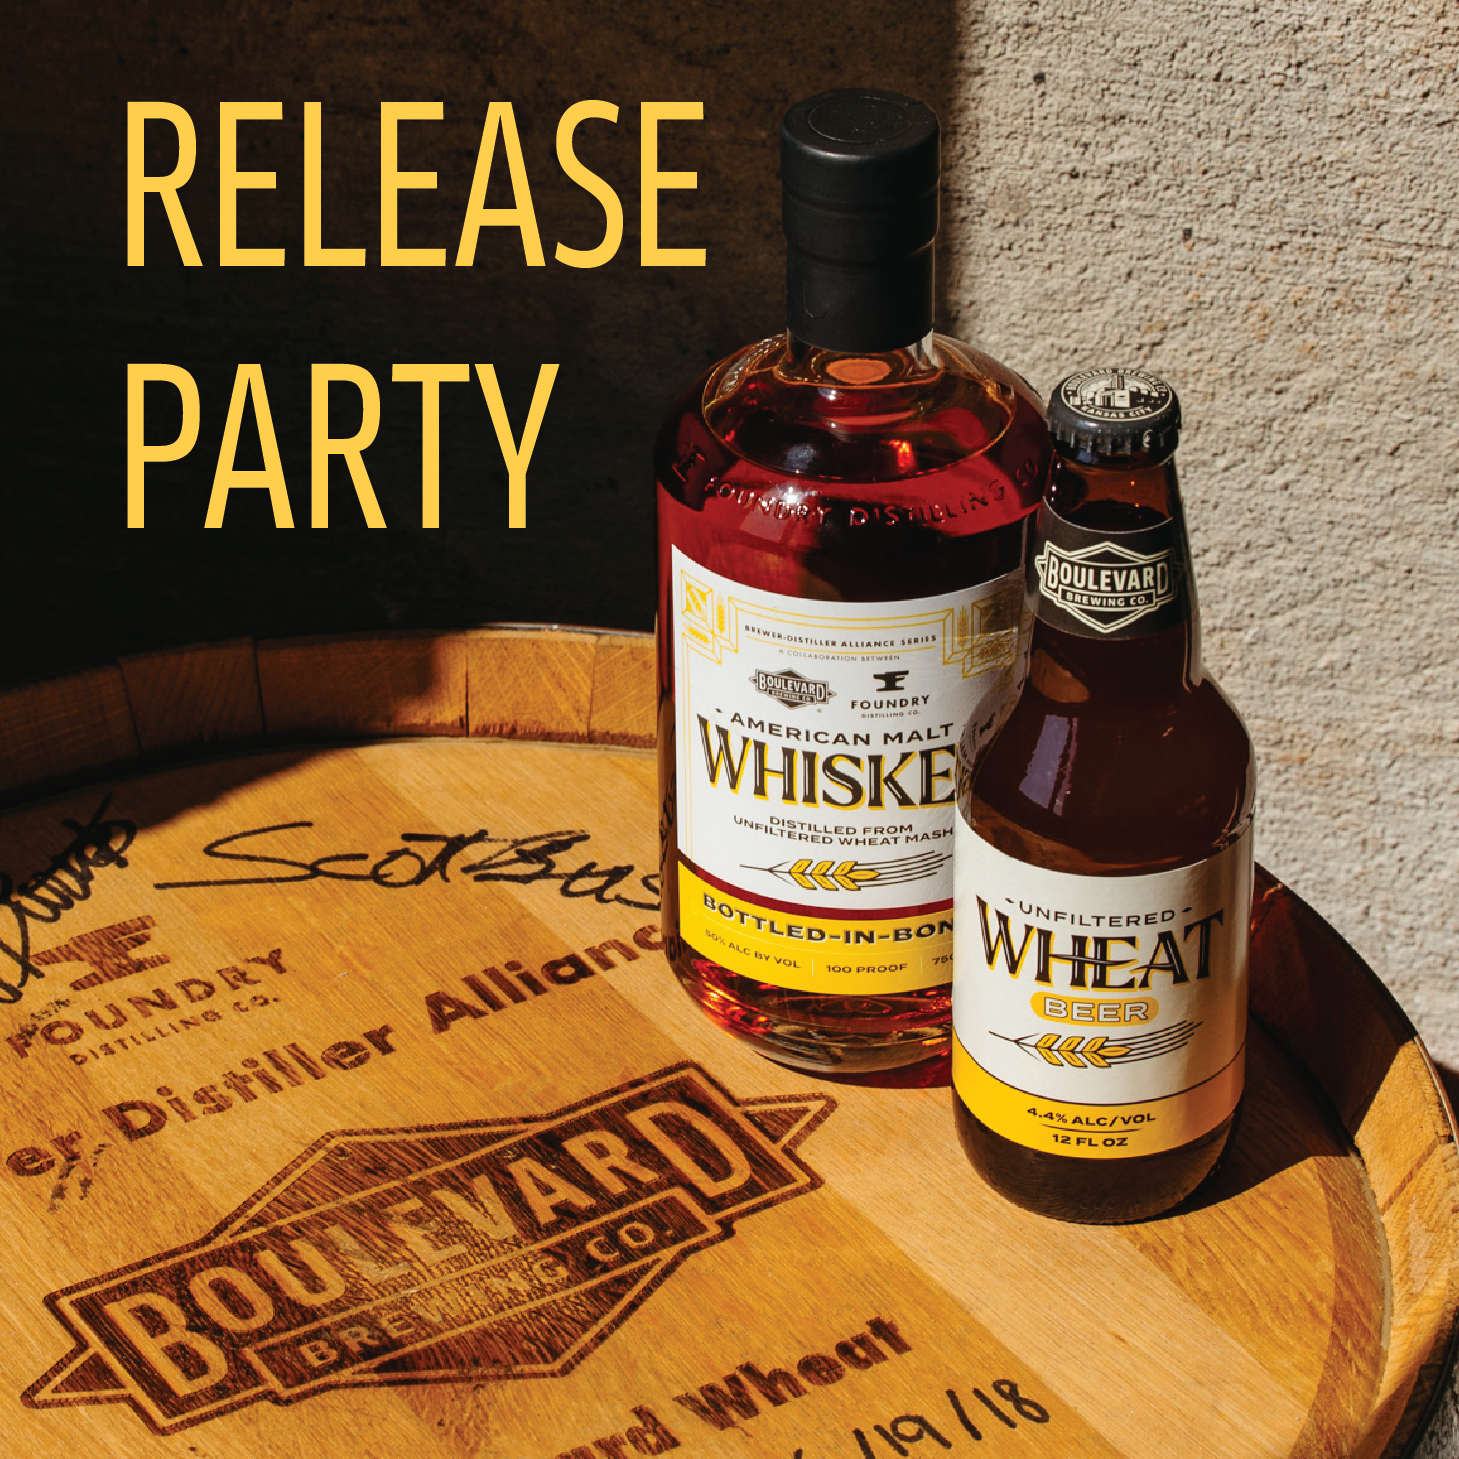 Foundry Wheat Whiskey Release Party